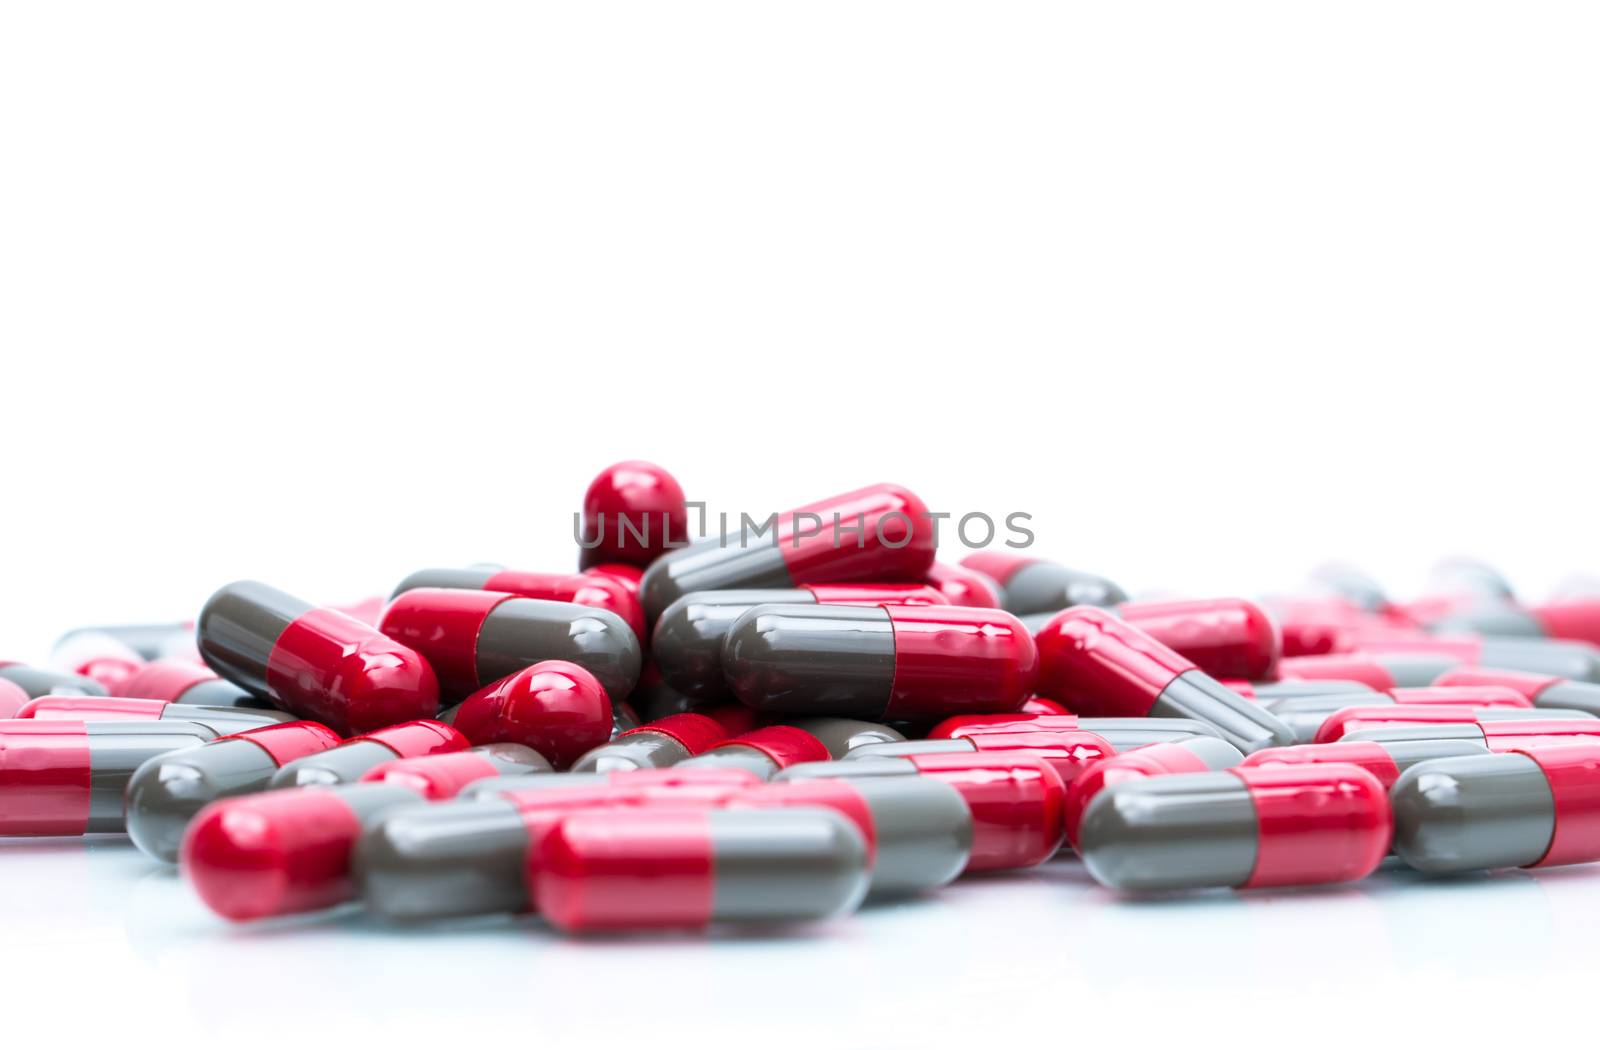 Macro shot detail selective focus of red and grey capsule pills isolated on white background with copy space for text. Migraine prophylaxis treatment concept. Pharmaceutical industry. Pharmacy background. Global healthcare concept.